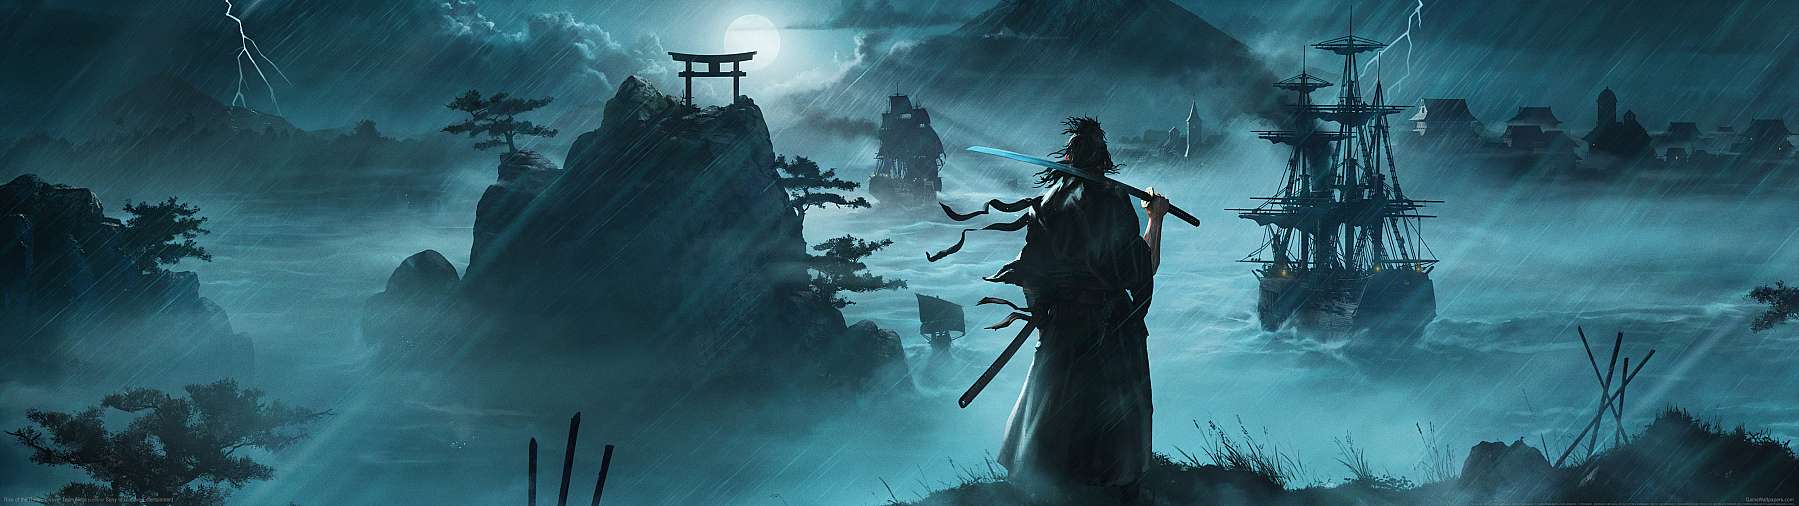 Rise of the Ronin wallpaper or background